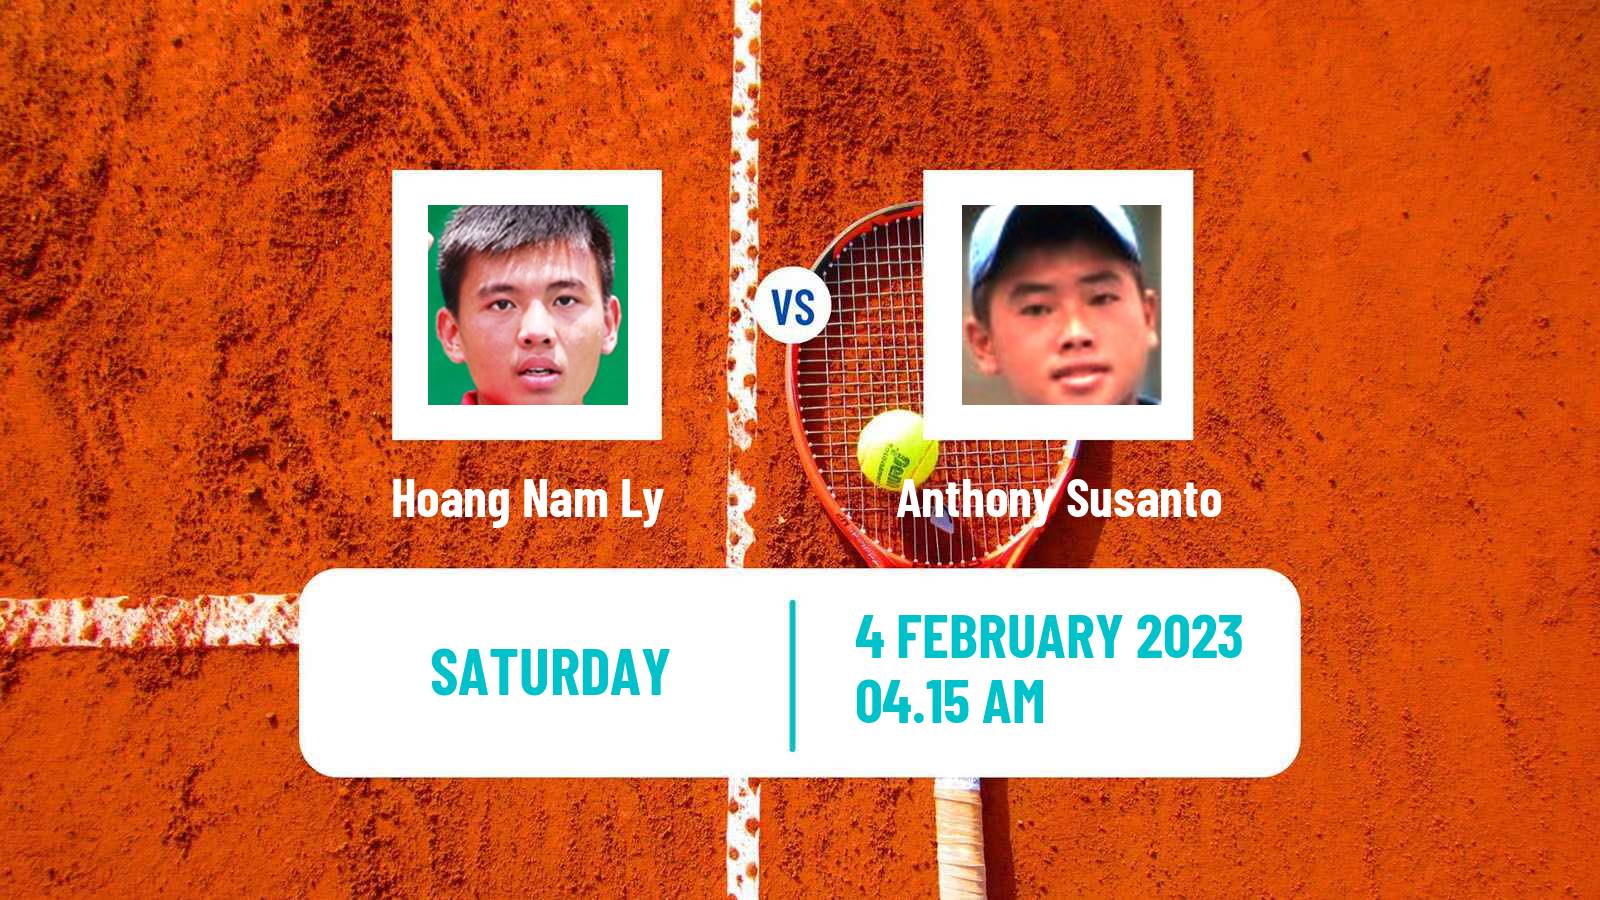 Tennis Davis Cup World Group II Hoang Nam Ly - Anthony Susanto